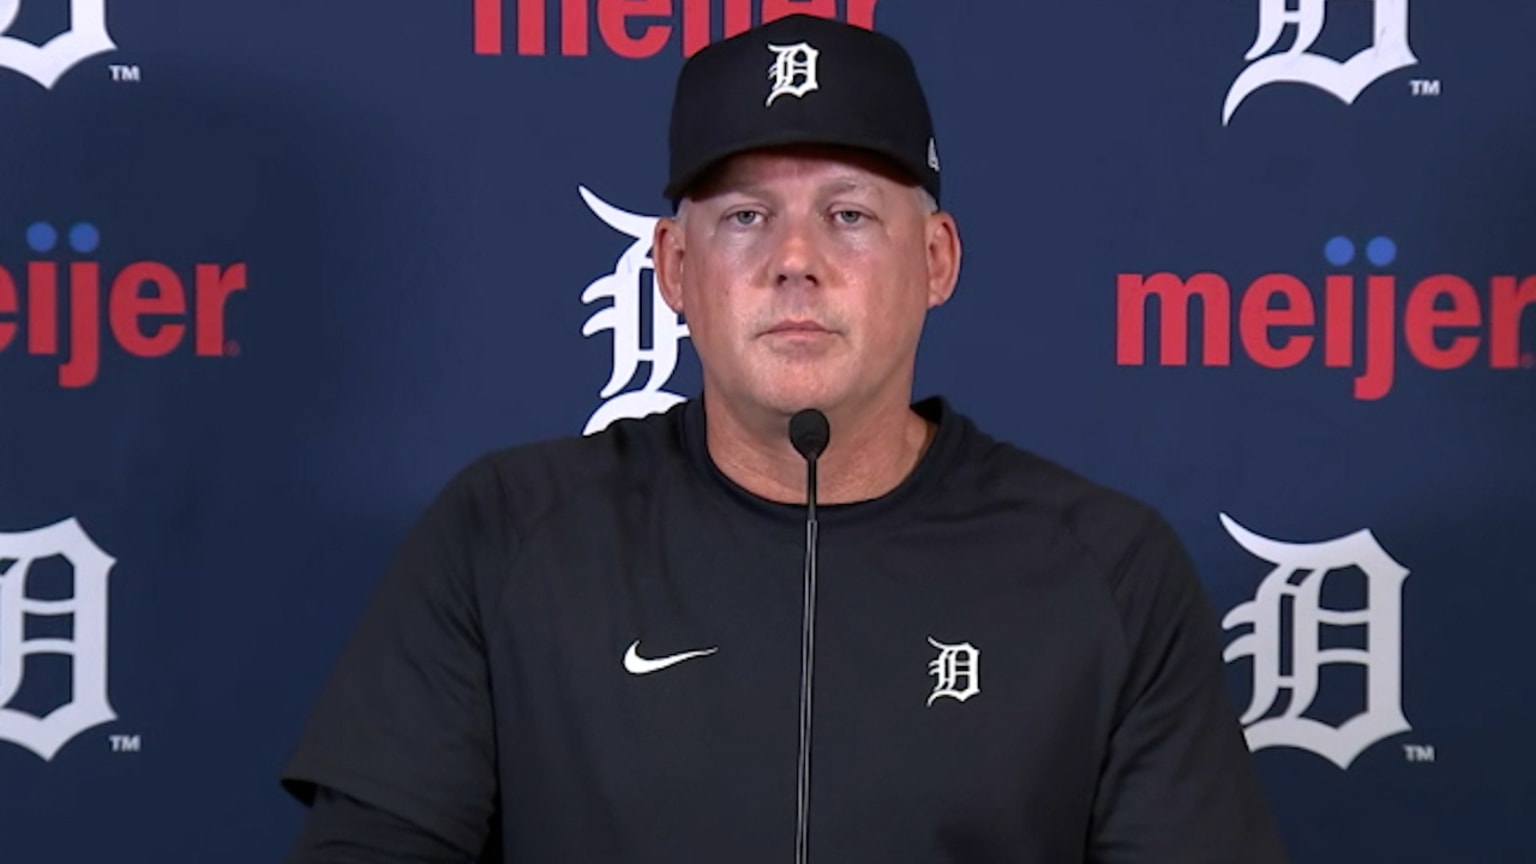 Detroit Tigers manager AJ Hinch talks after sweeping Brewers